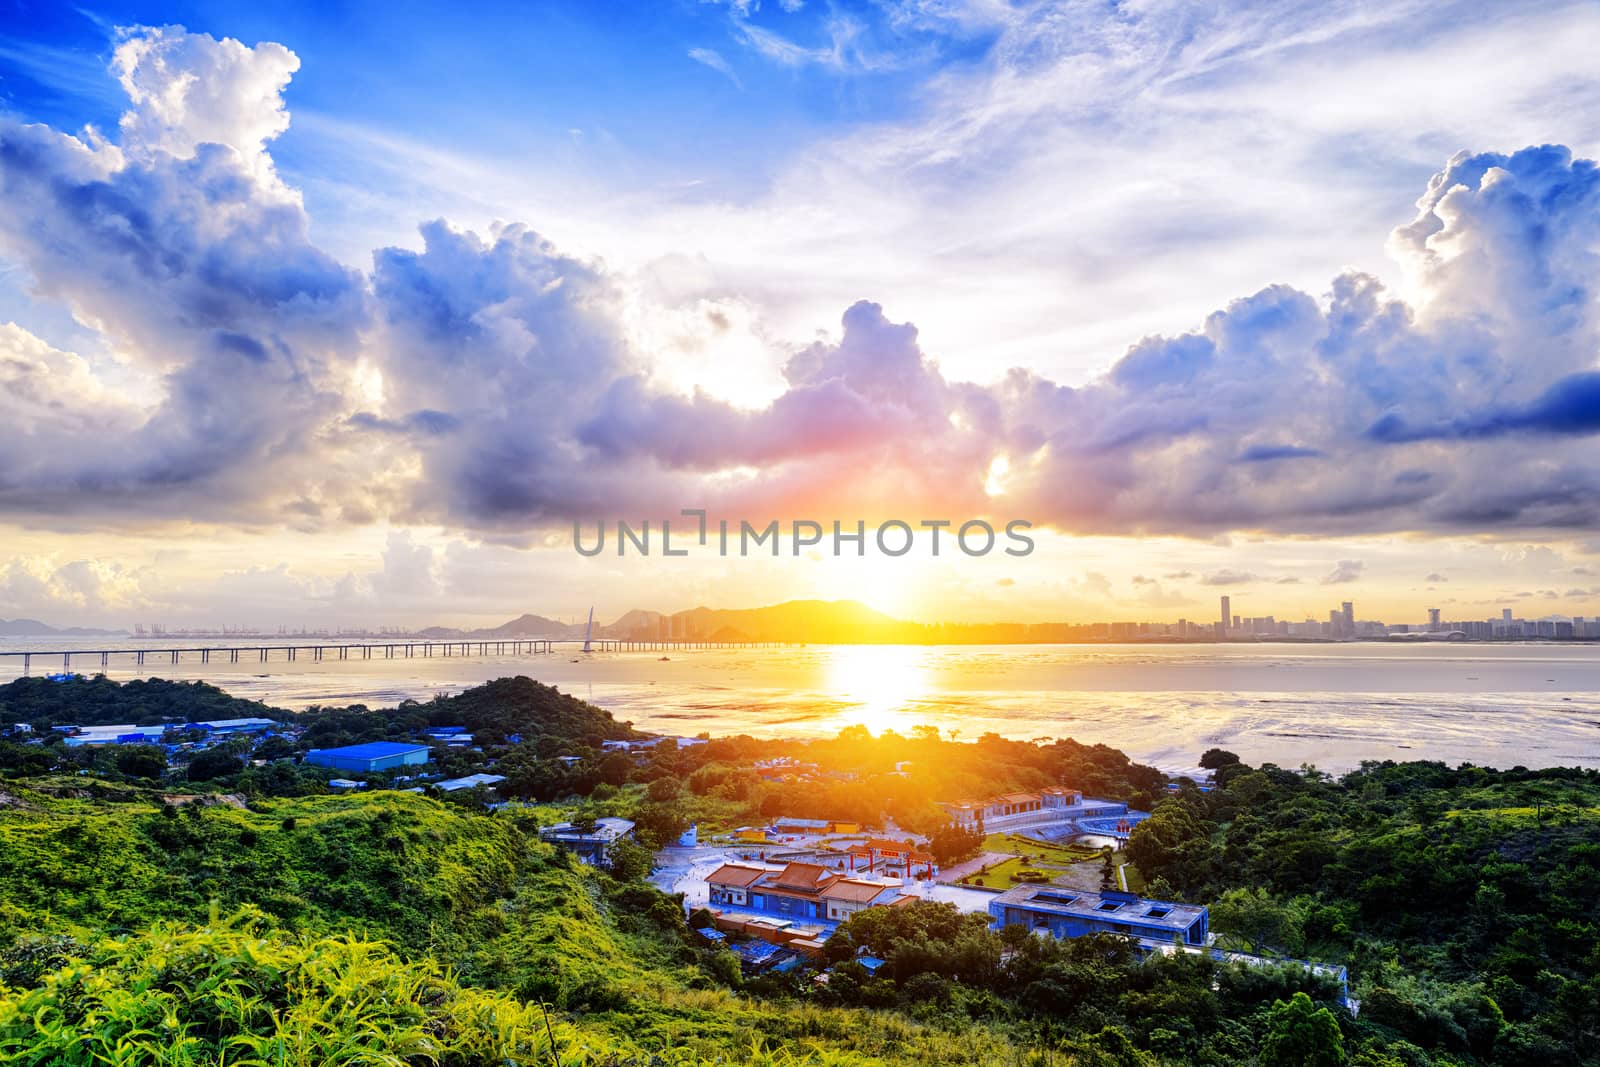 Village with beautiful sunset over hong kong  coastline. View from the top of mountain